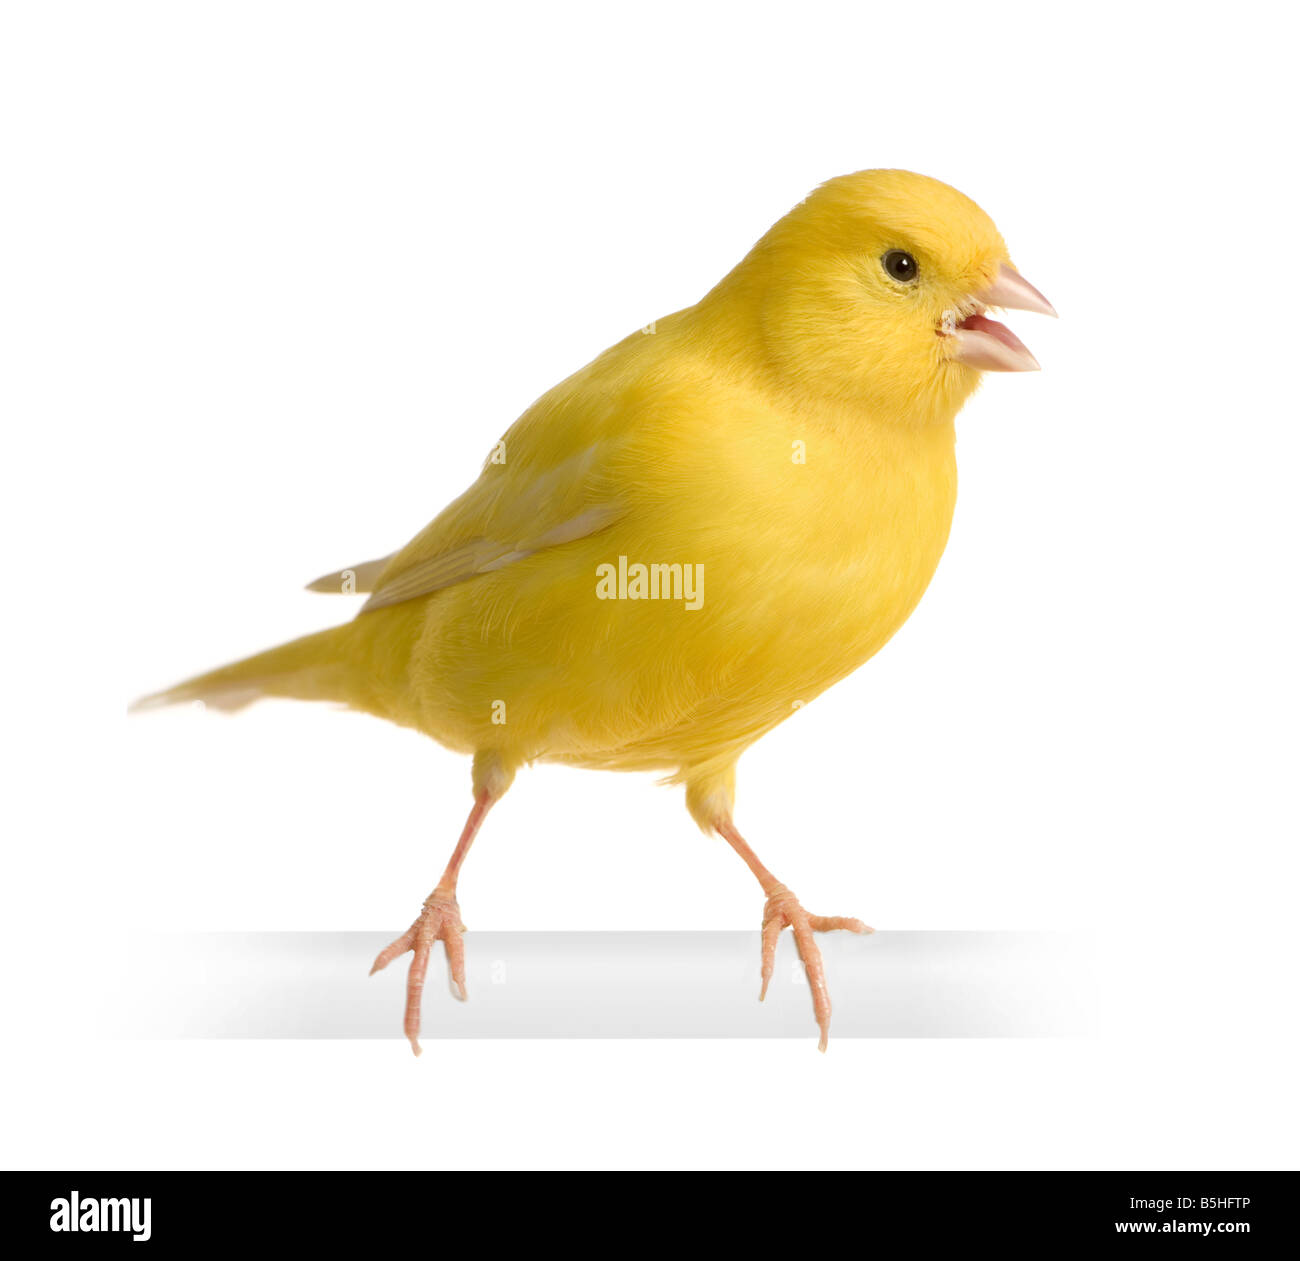 Yellow canary Serinus canaria on its perch in front of a white background Stock Photo